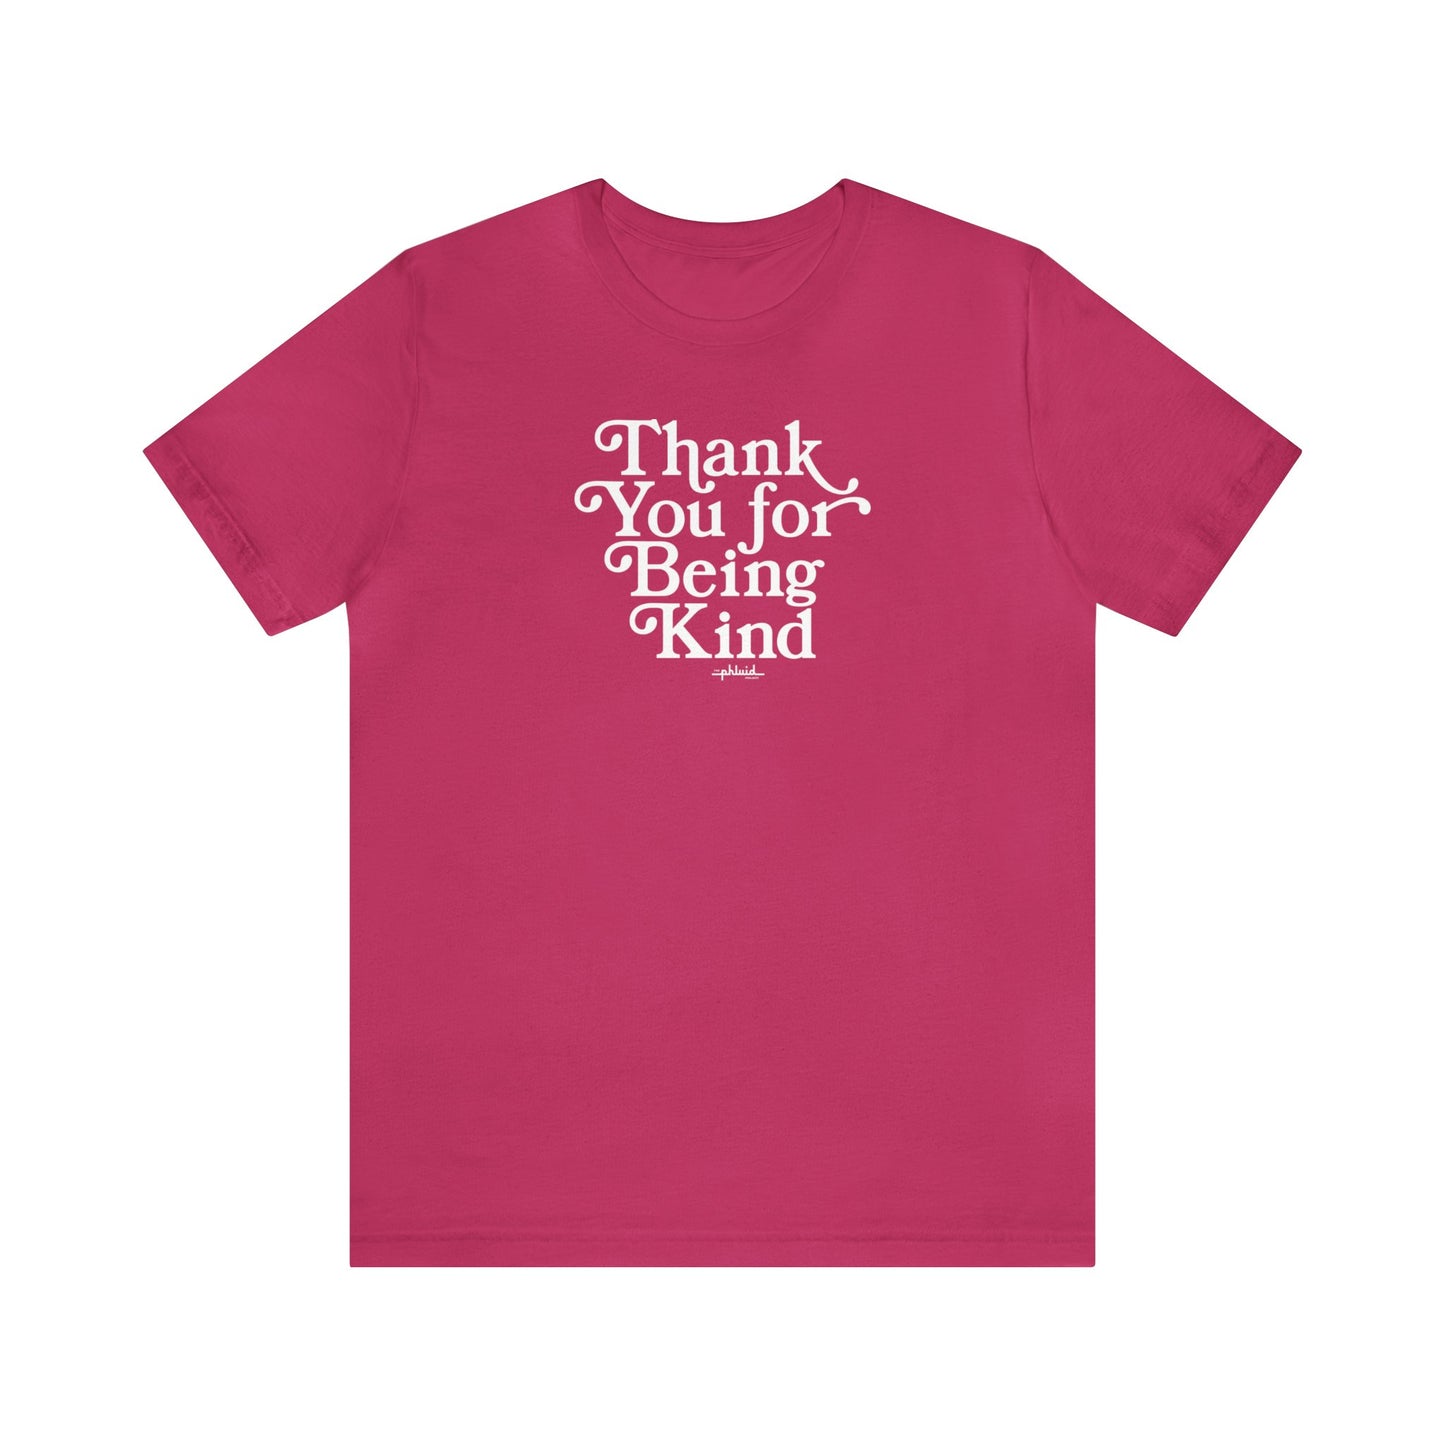 Thank You For Being Kind Tee